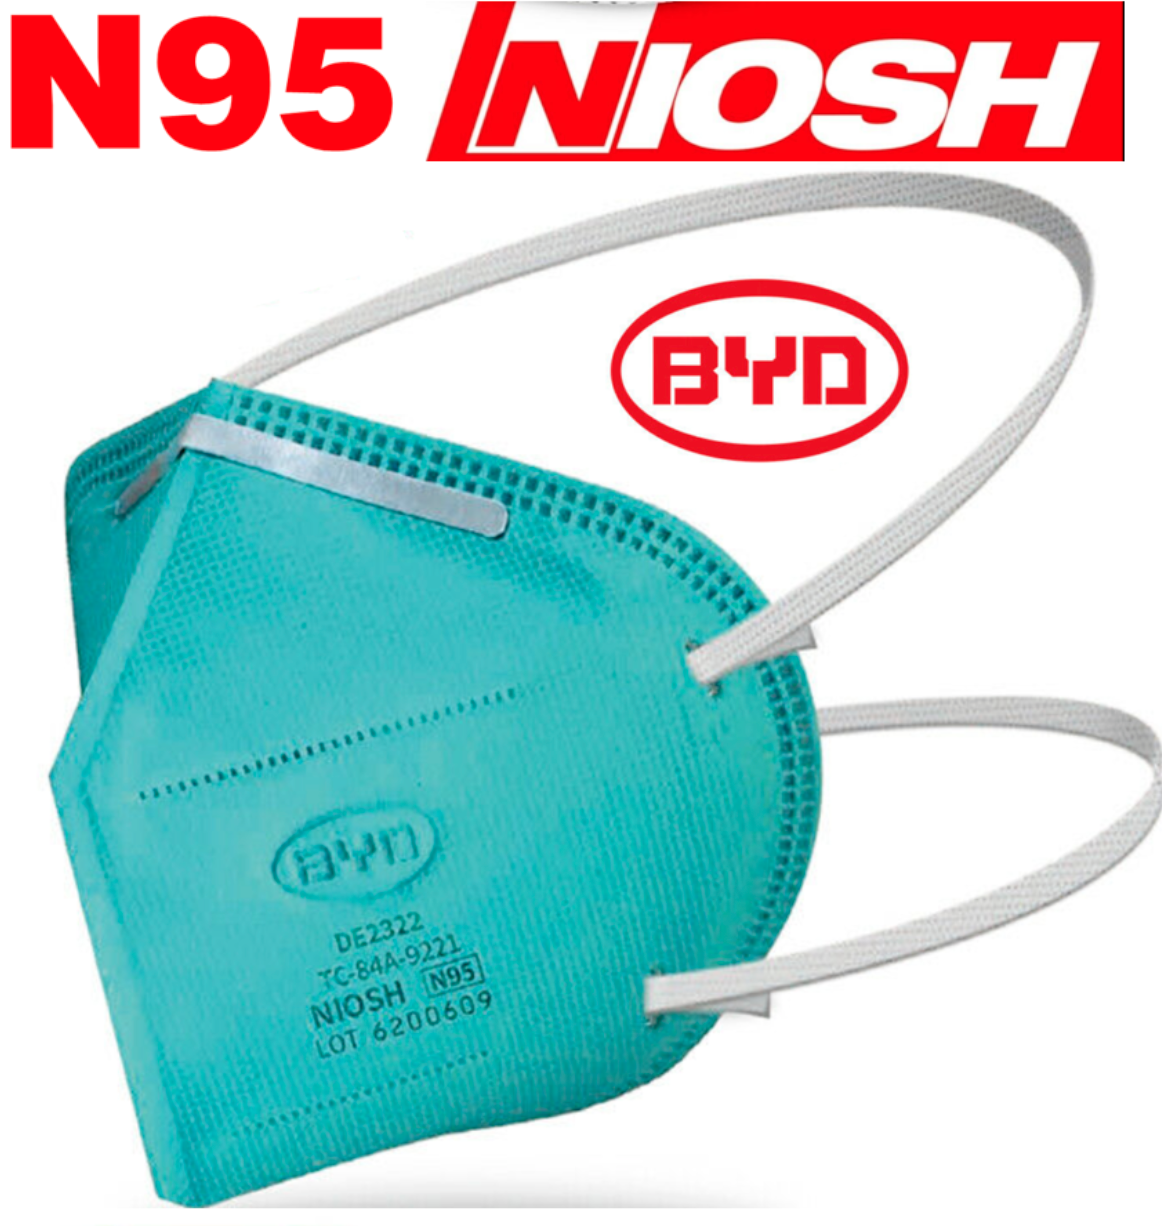 N95 Protective Disposable Face Mask Cover Niosh Respirator Pack Of 10